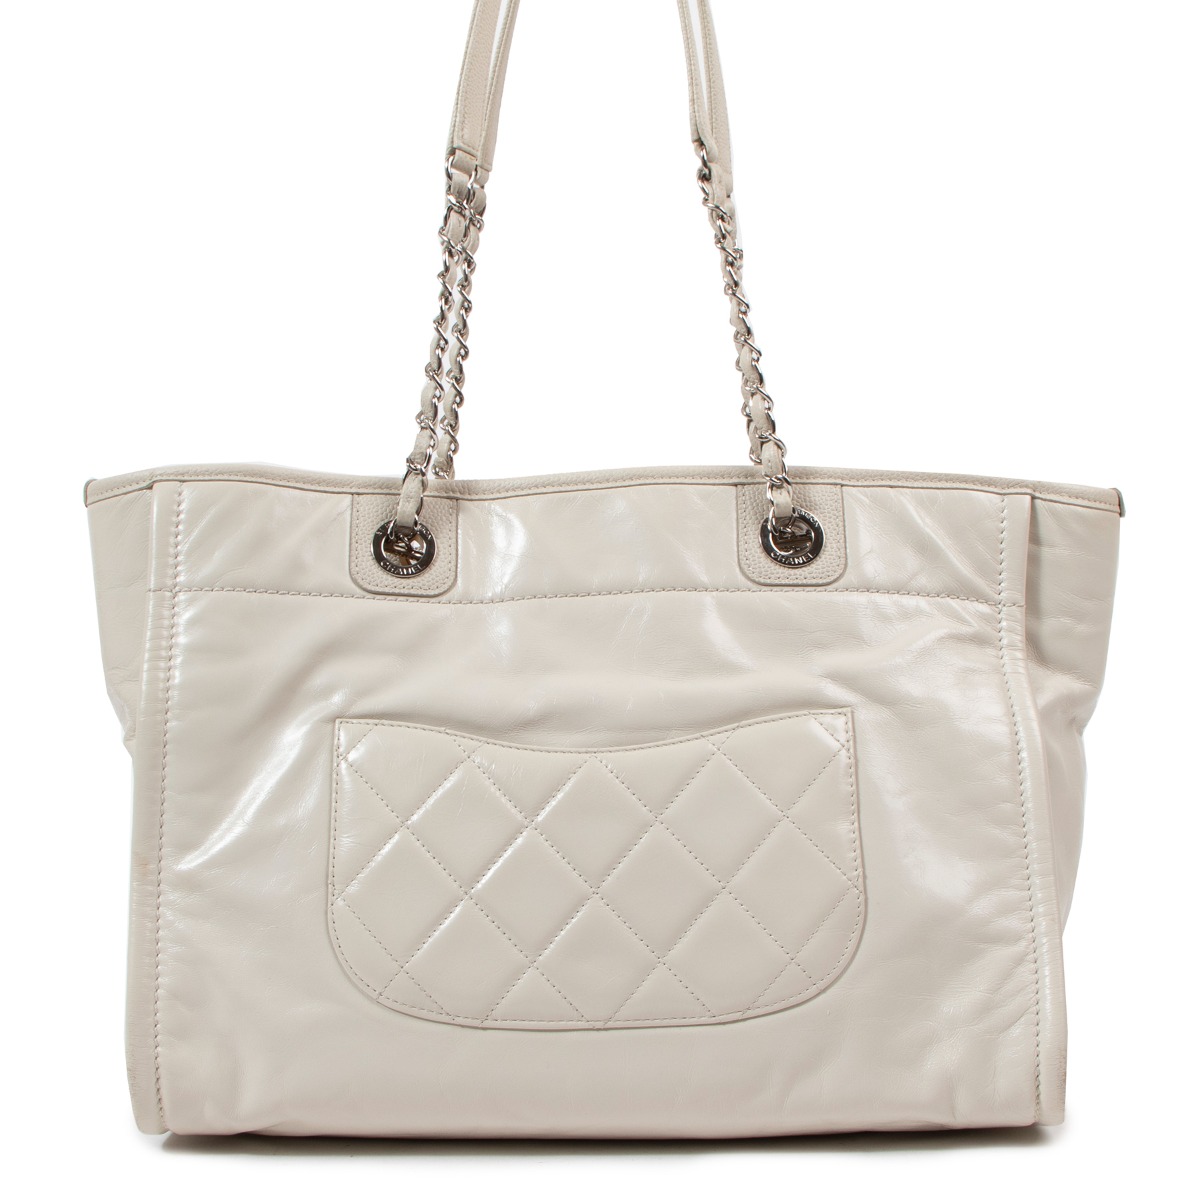 CHANEL Matelasse White Leather Tote Bag Wild Stitch Used 2026T